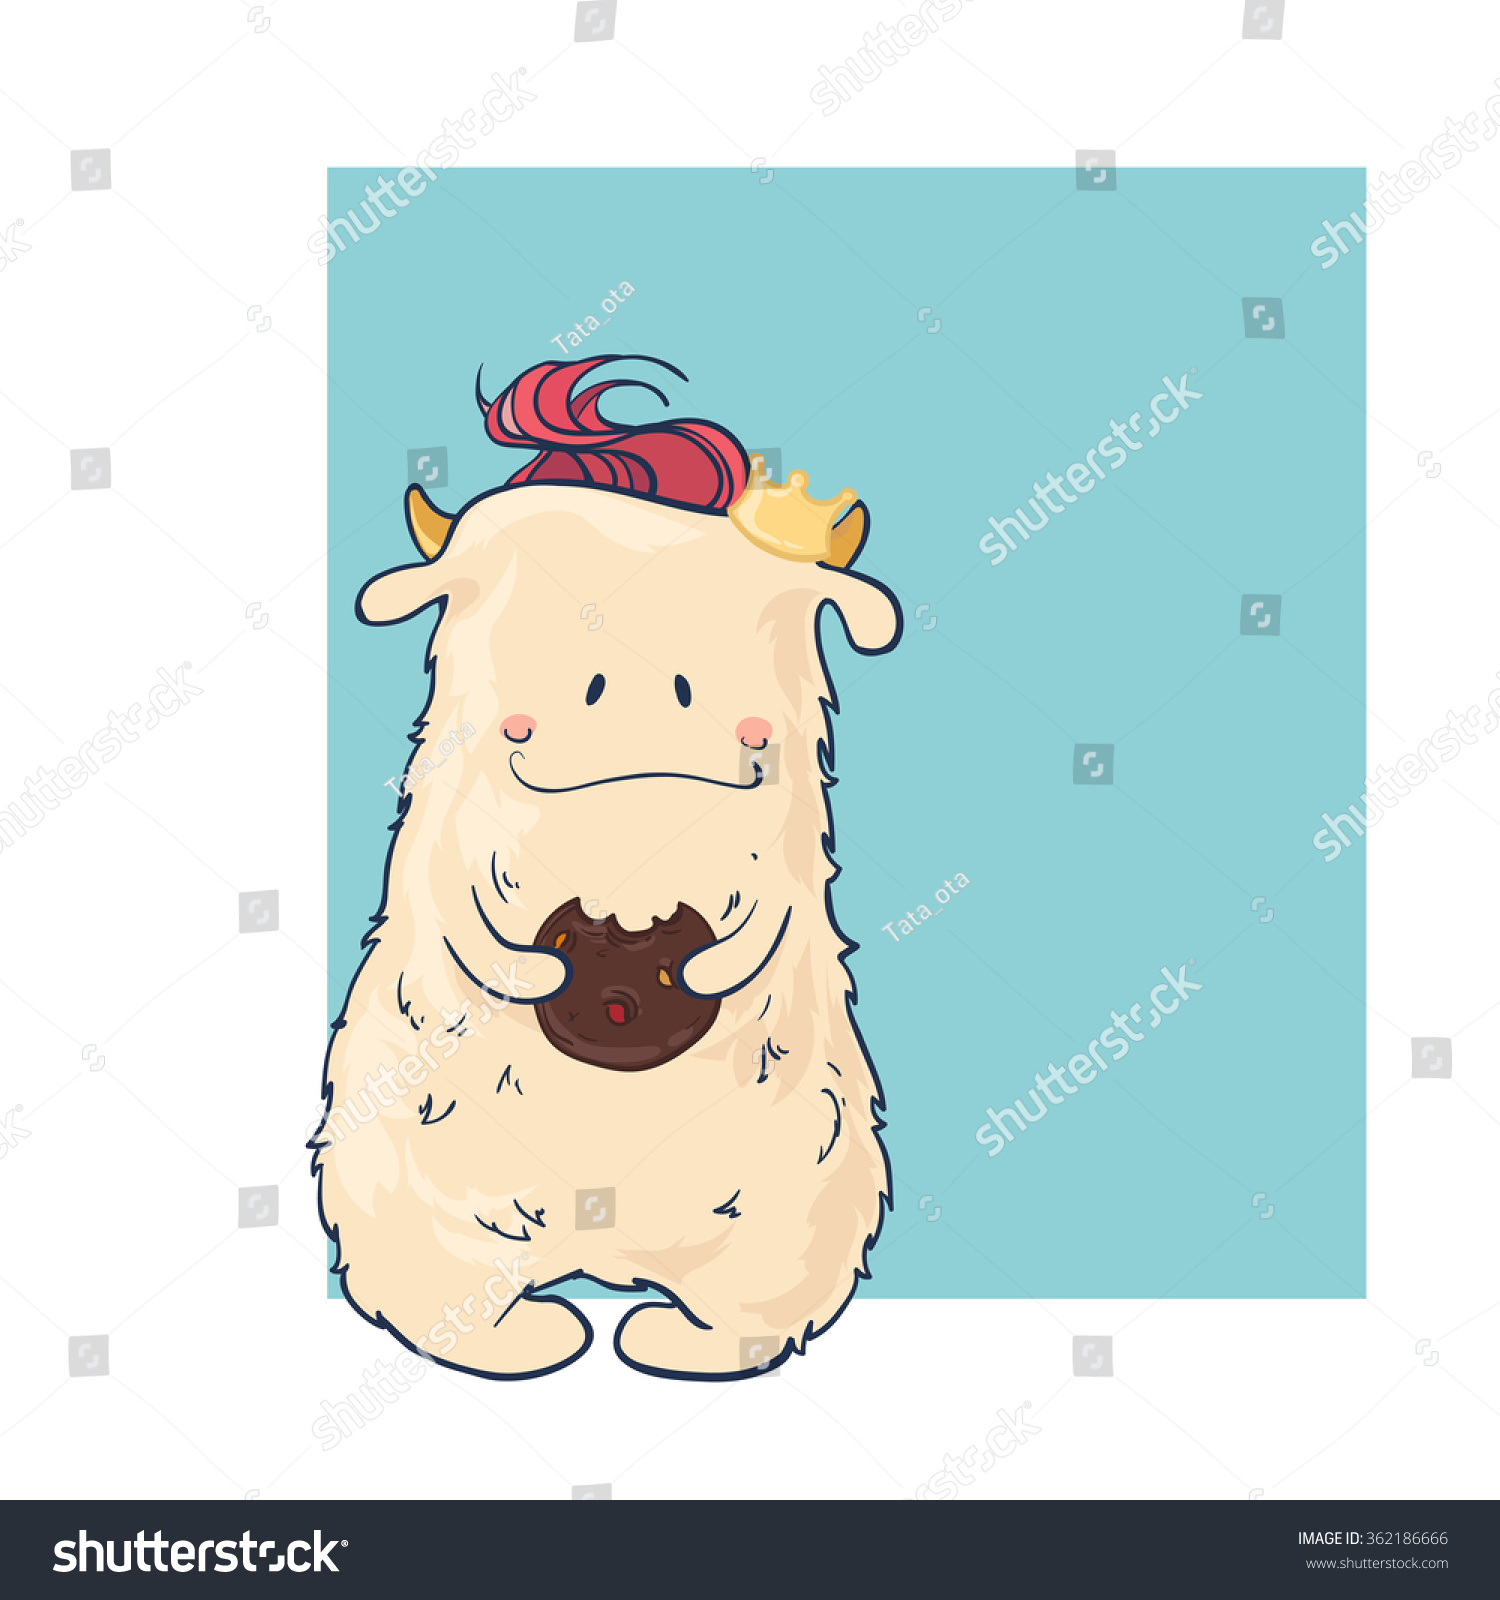 SVG of Cute Cartoon Monster. Monster eats a big cookie. Cartoon and funny monsters cards with place for your text. Vector illustration. svg